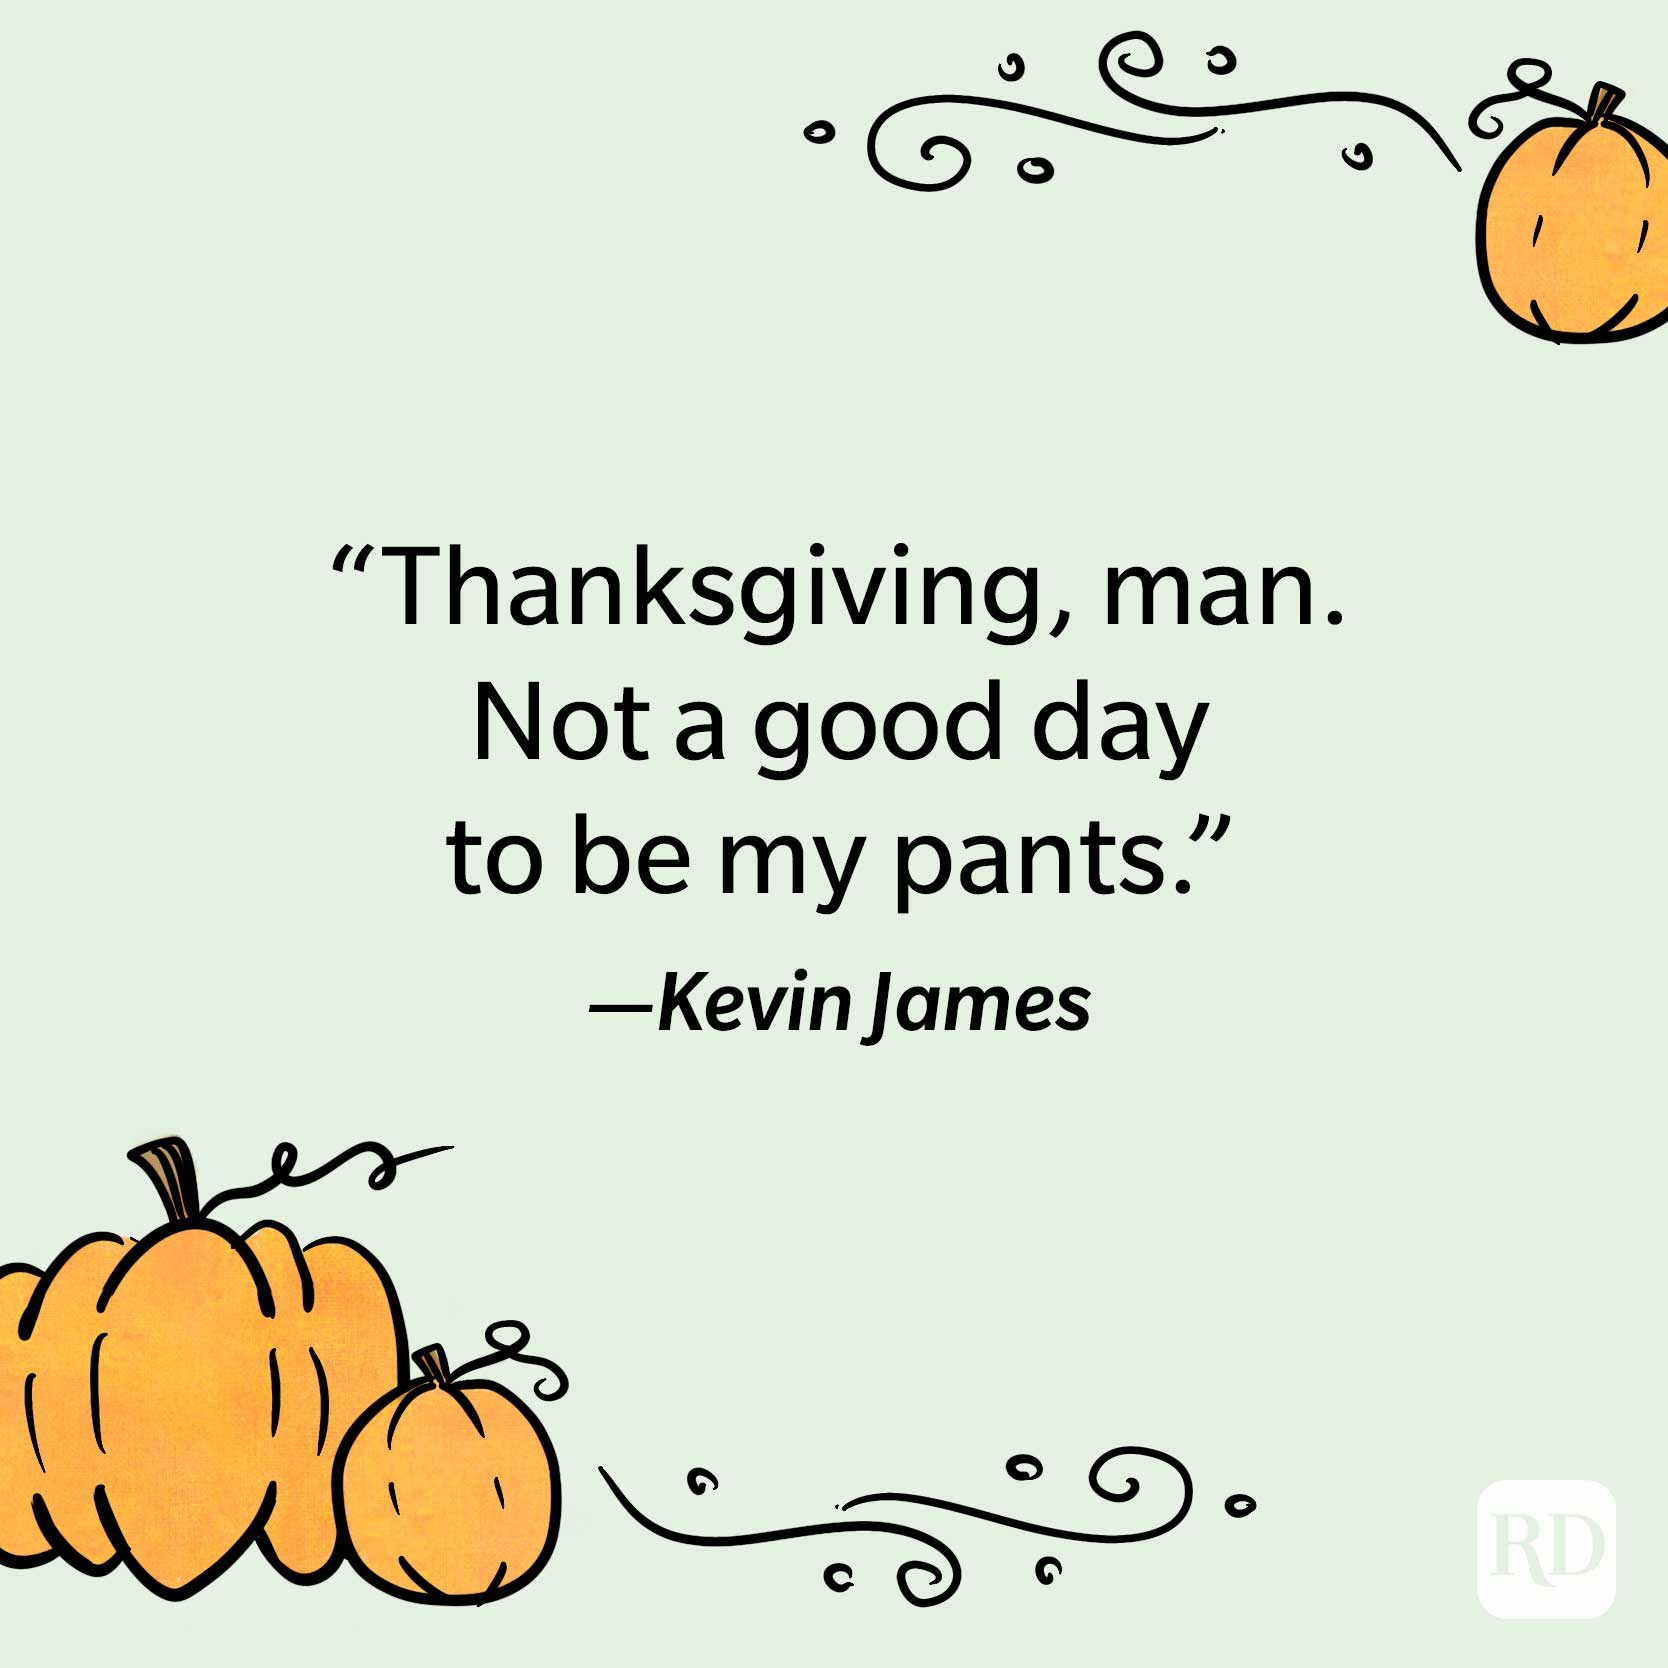 happy thanksgiving quotes funny